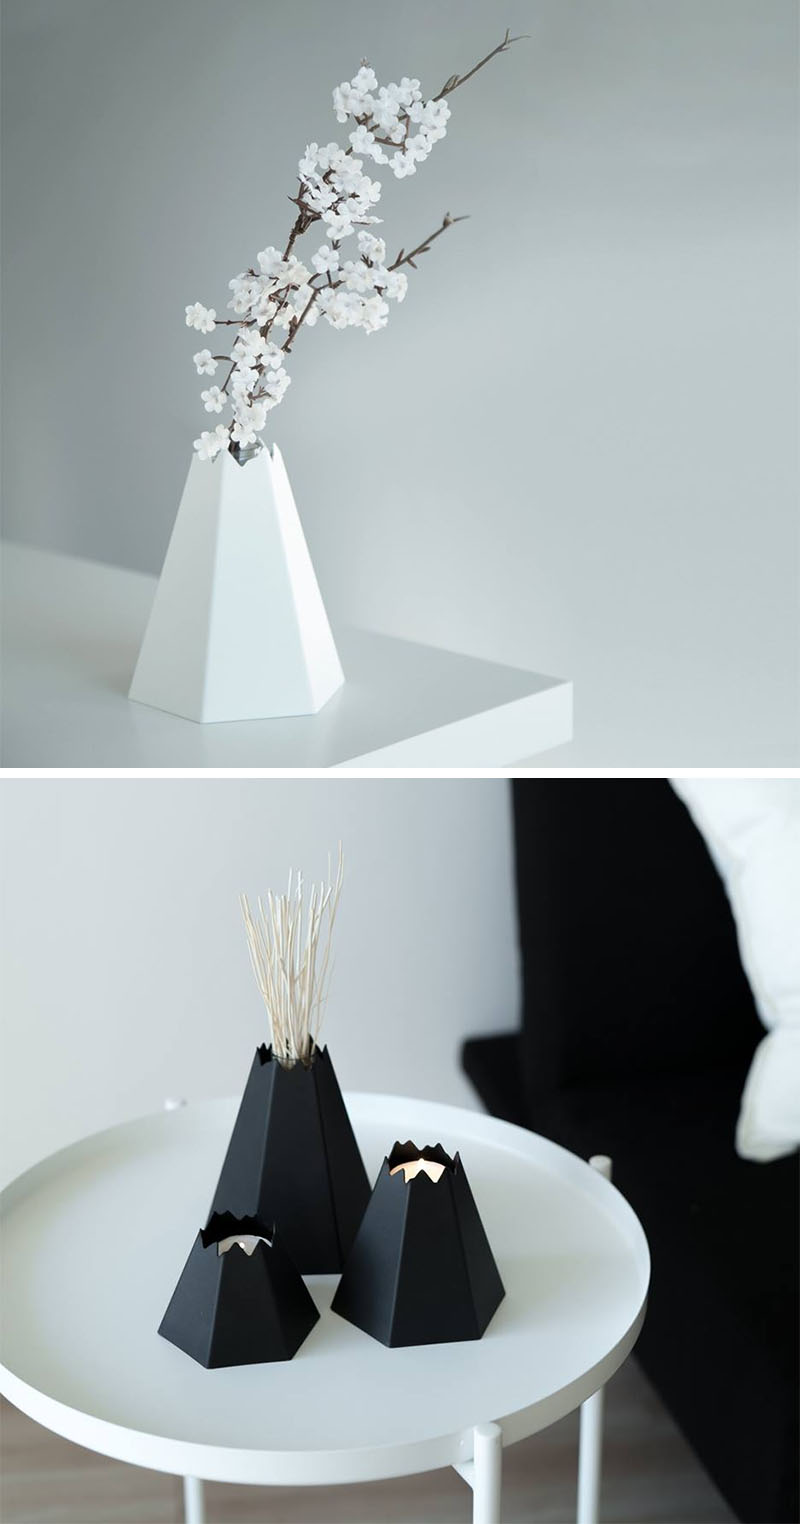 Origami Inspired The Design Of These Small Home Decor Items